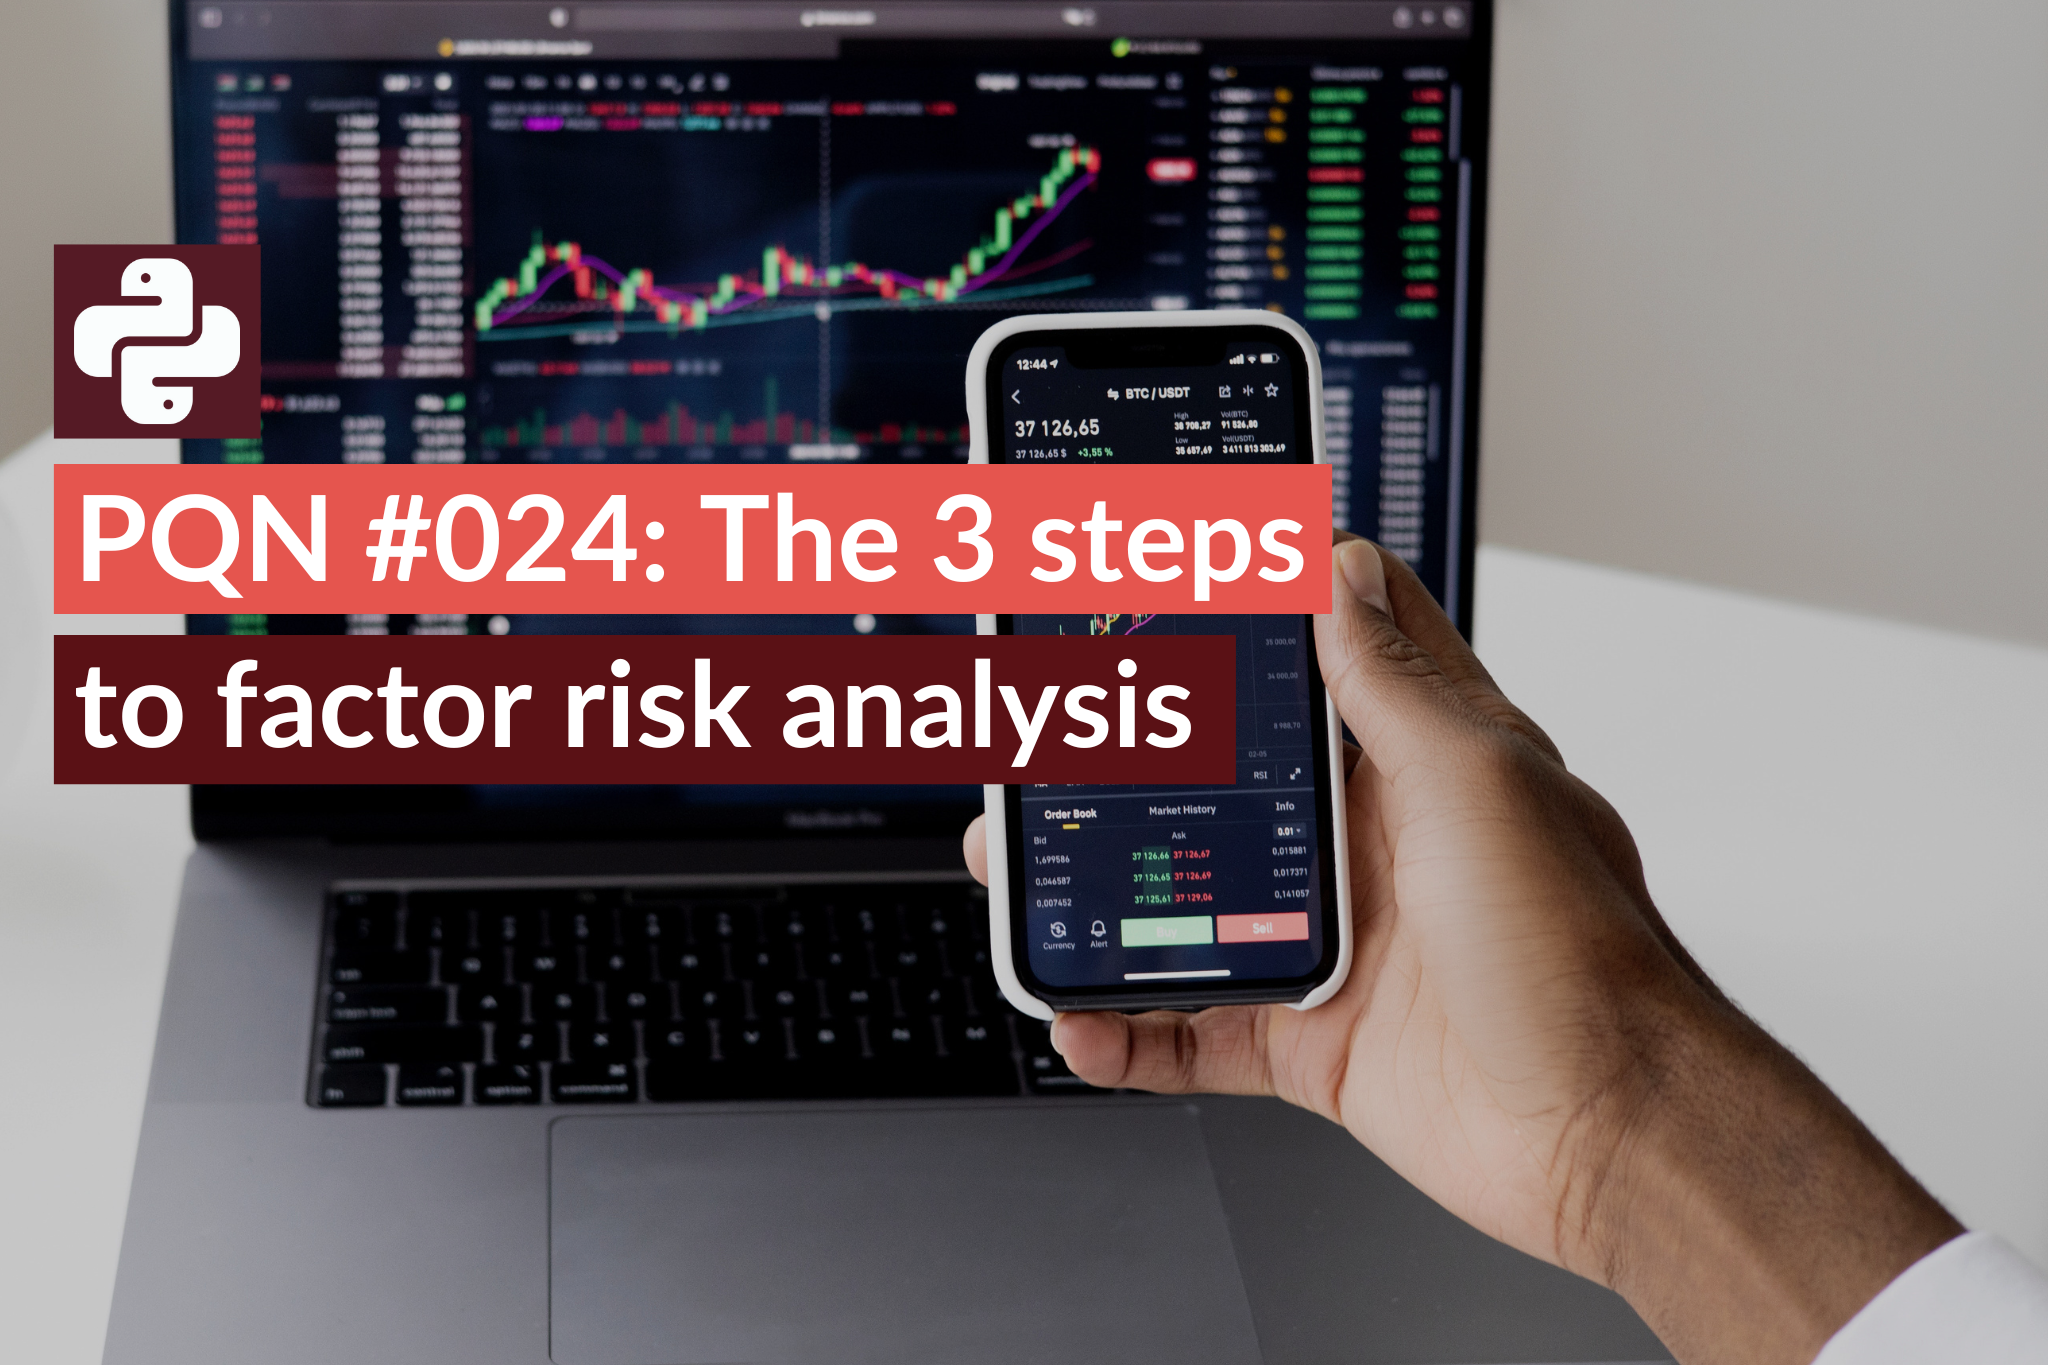 PQN #024: The 3 steps to factor risk analysis